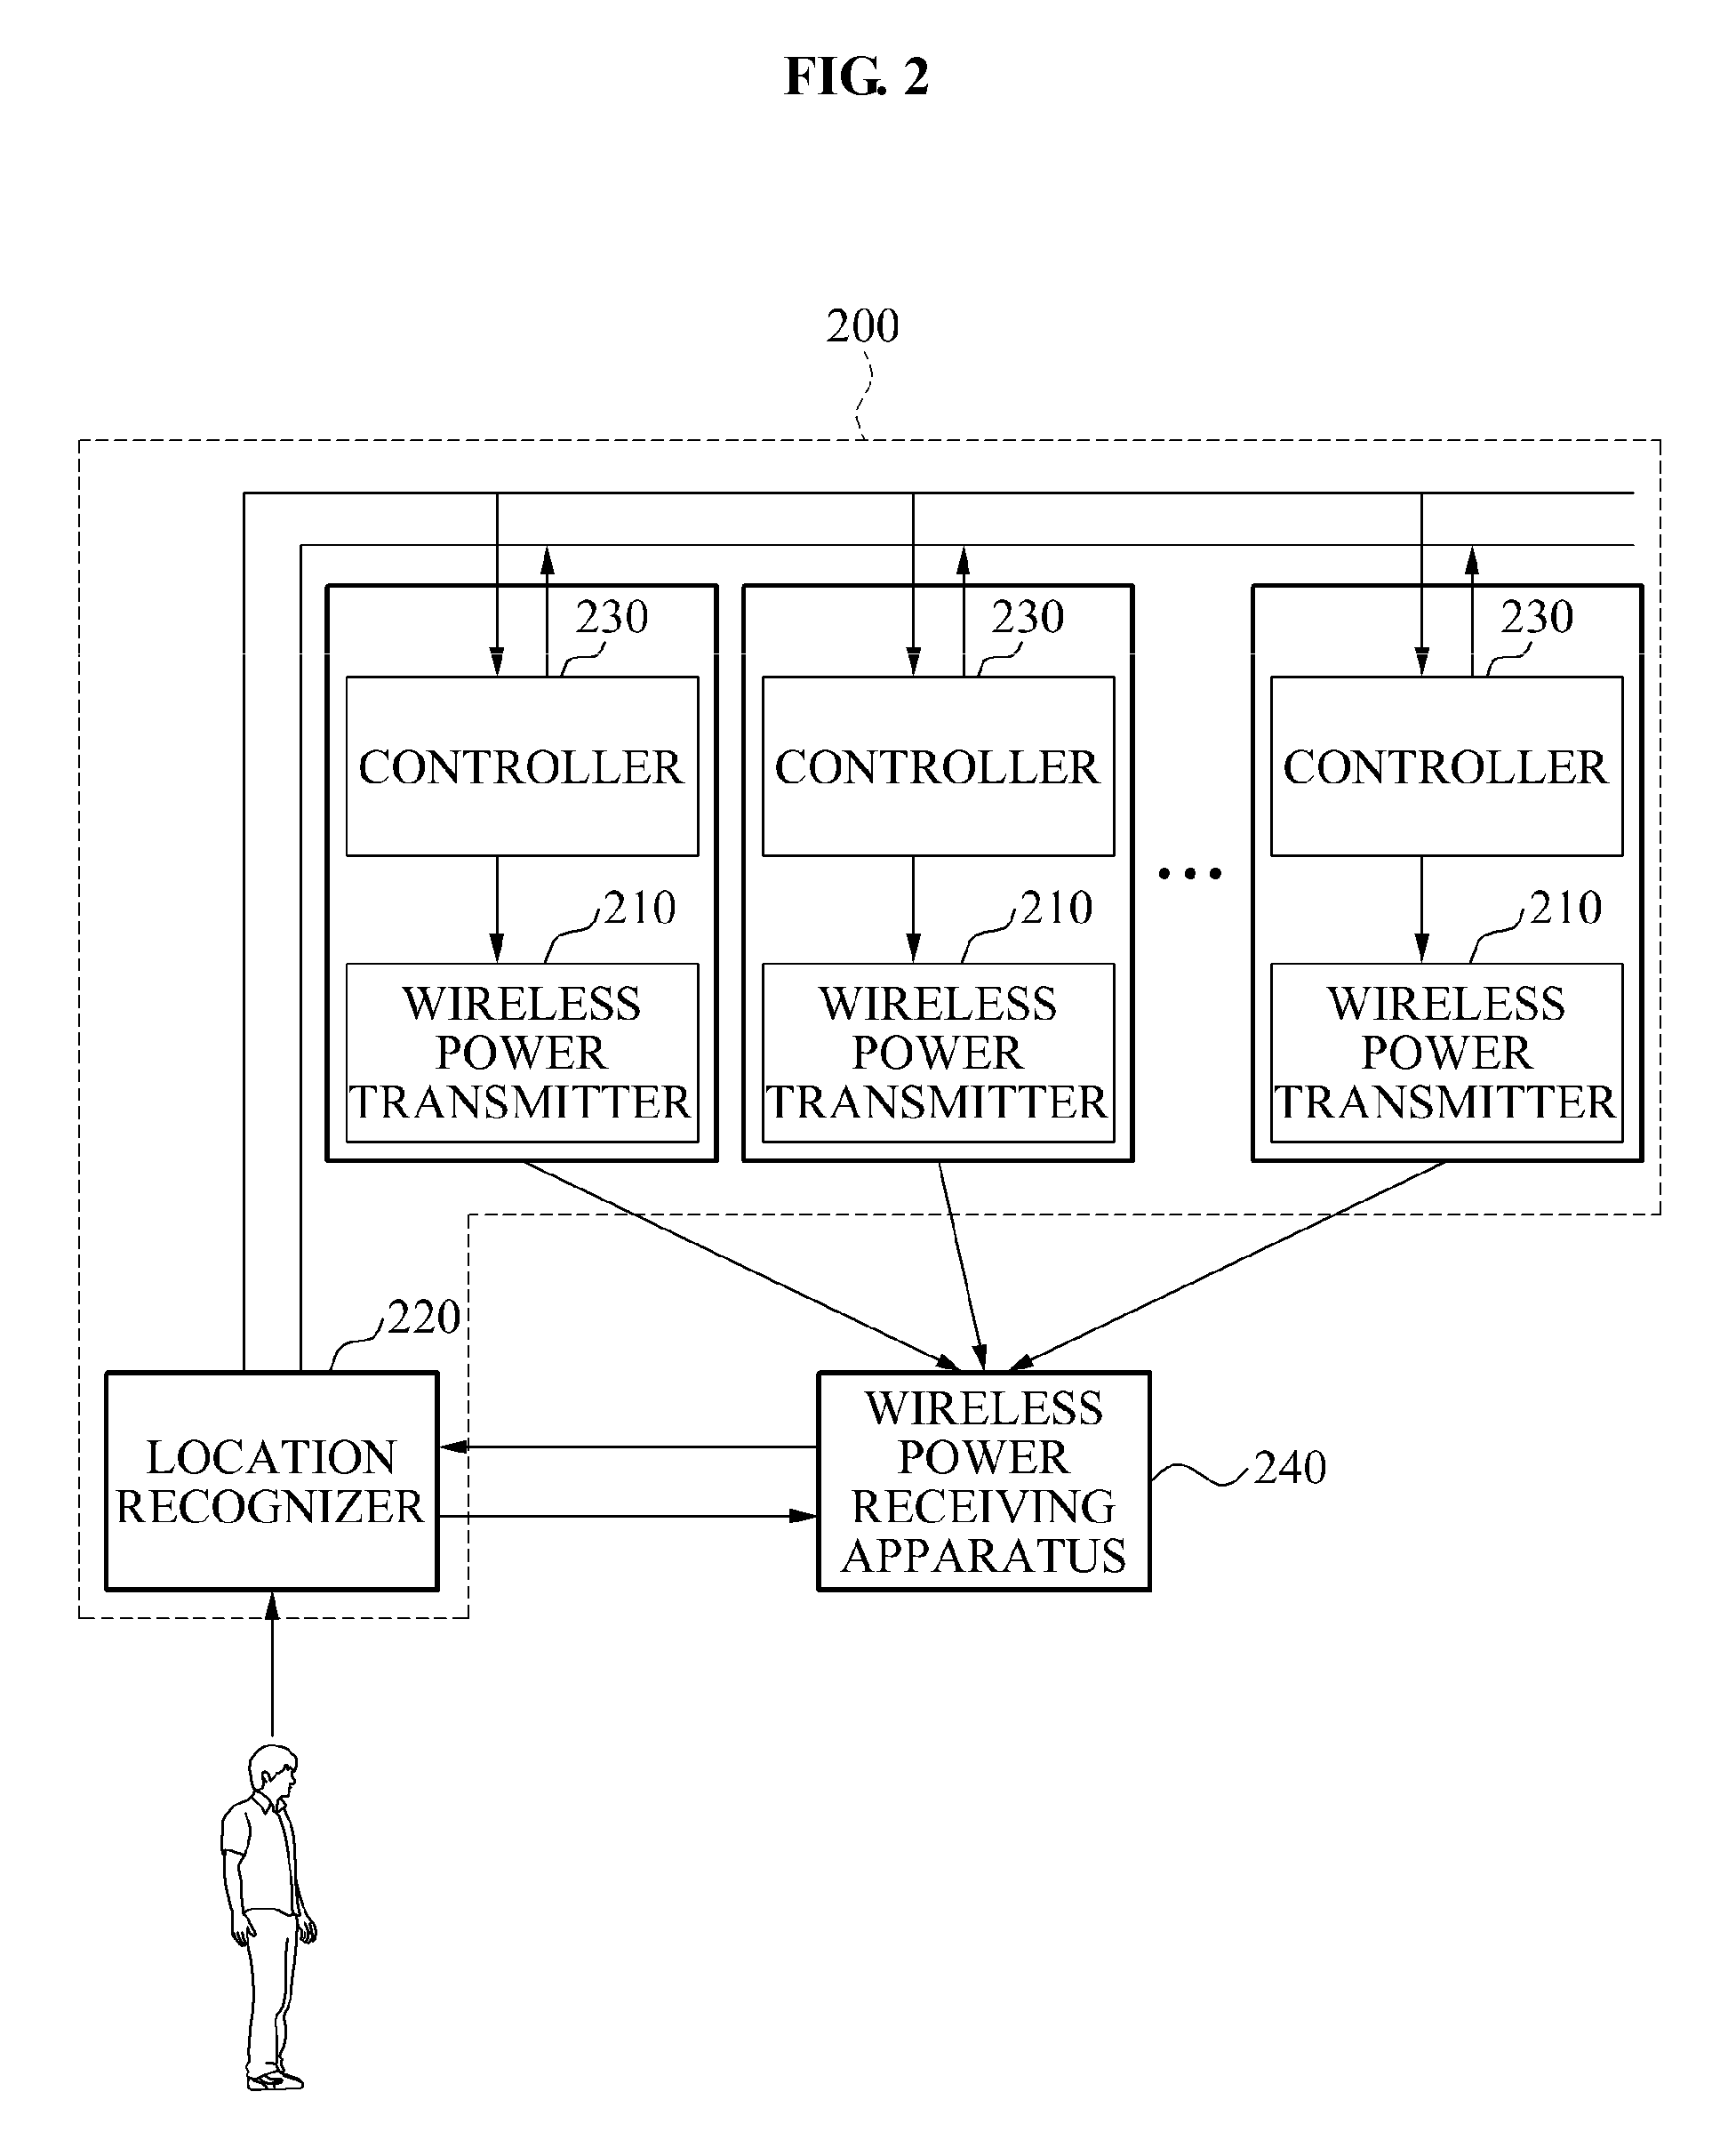 Wireless power charging apparatus and method of charging the apparatus